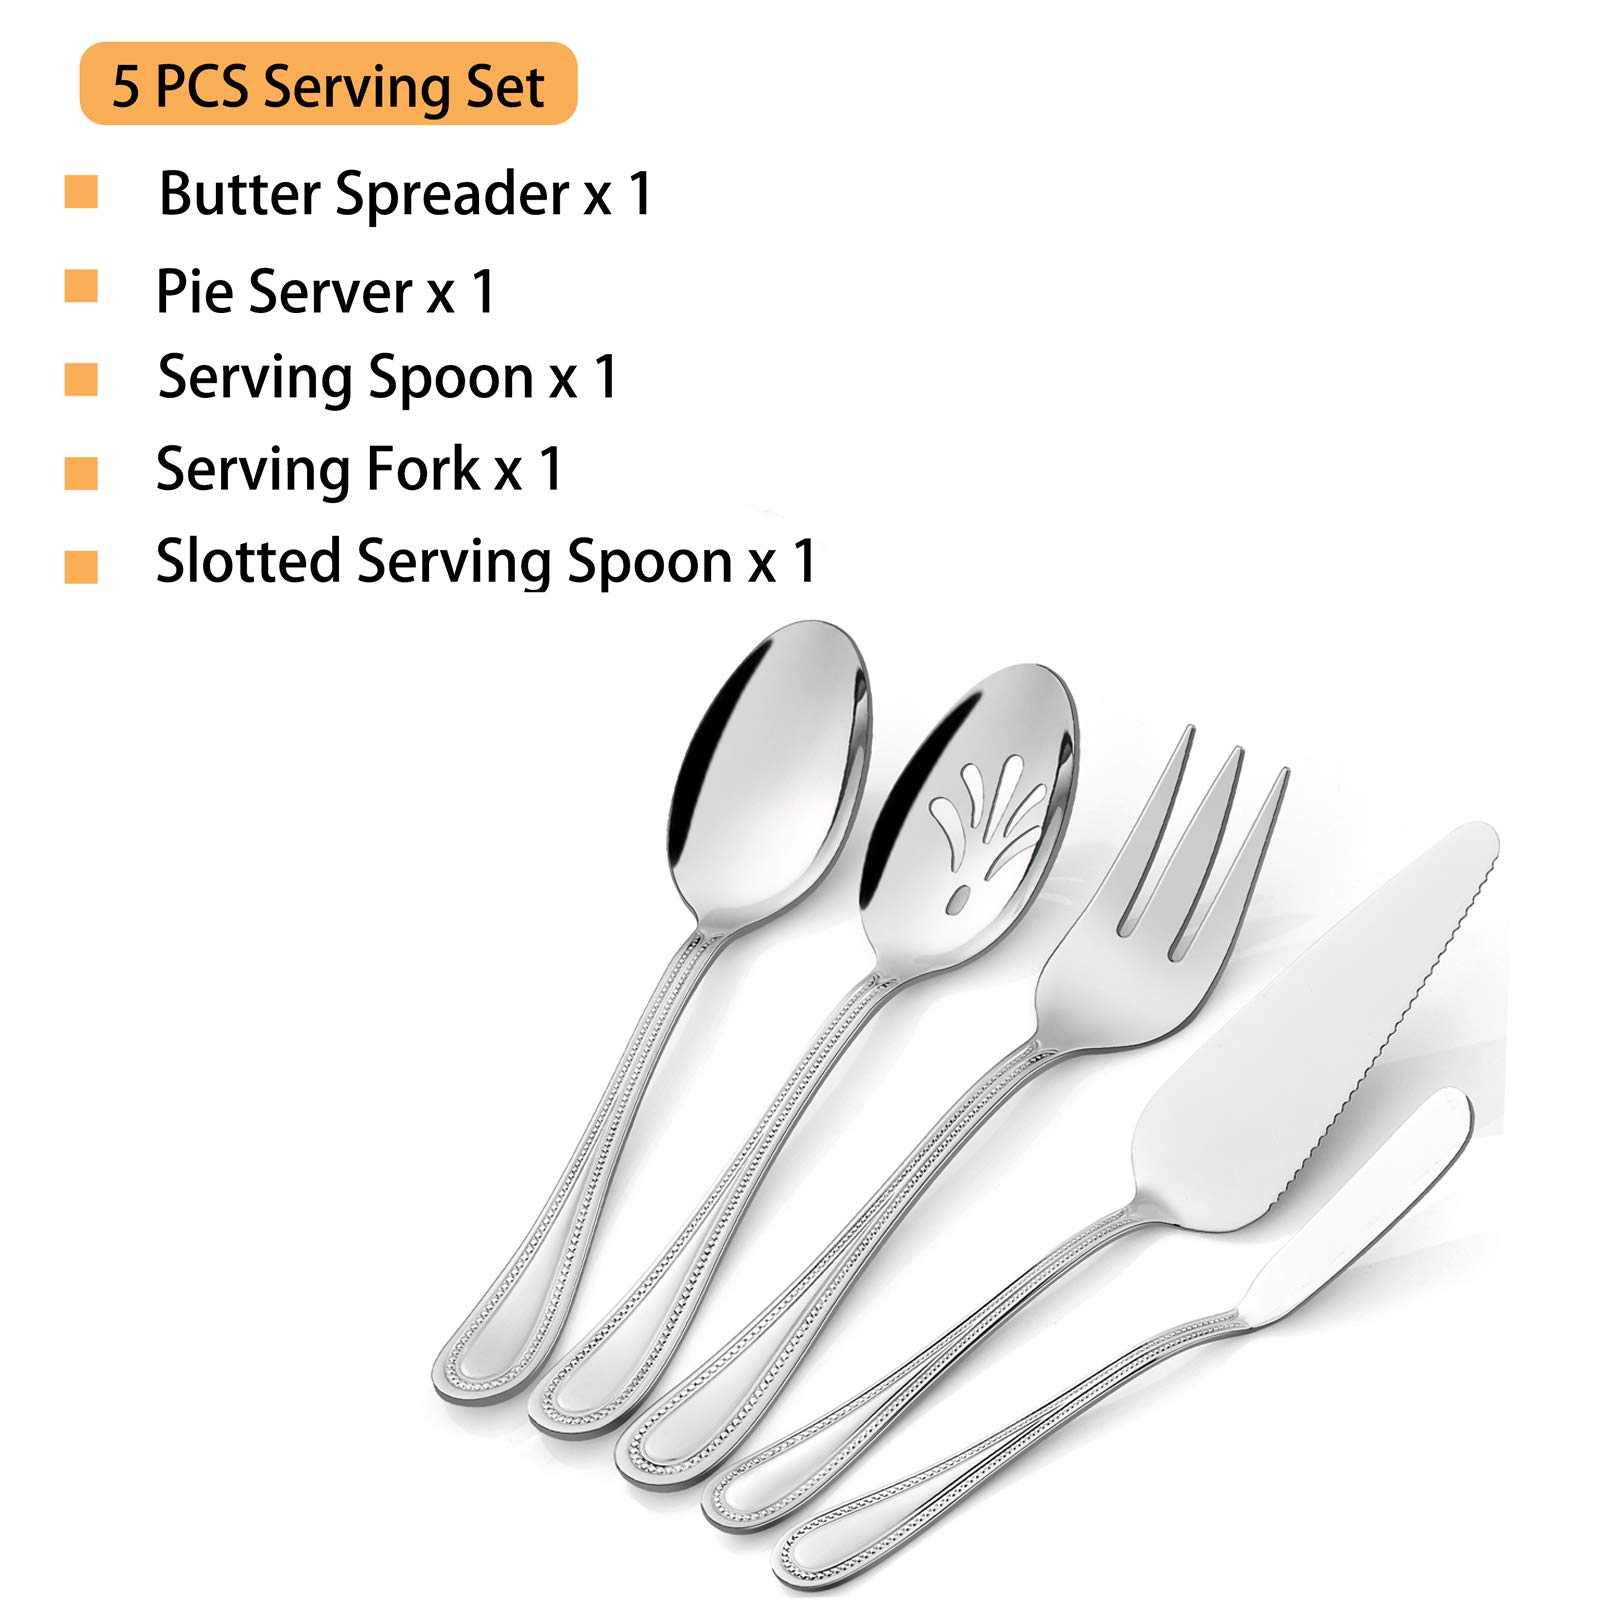 Serving Utensils, HaWare Stainless Steel Silverware Serving Set 5 Pieces, Pearled Edge Hostess Serving Set for Buffet Party Kitchen Restaurant, Mirror Finished & Dishwasher Safe